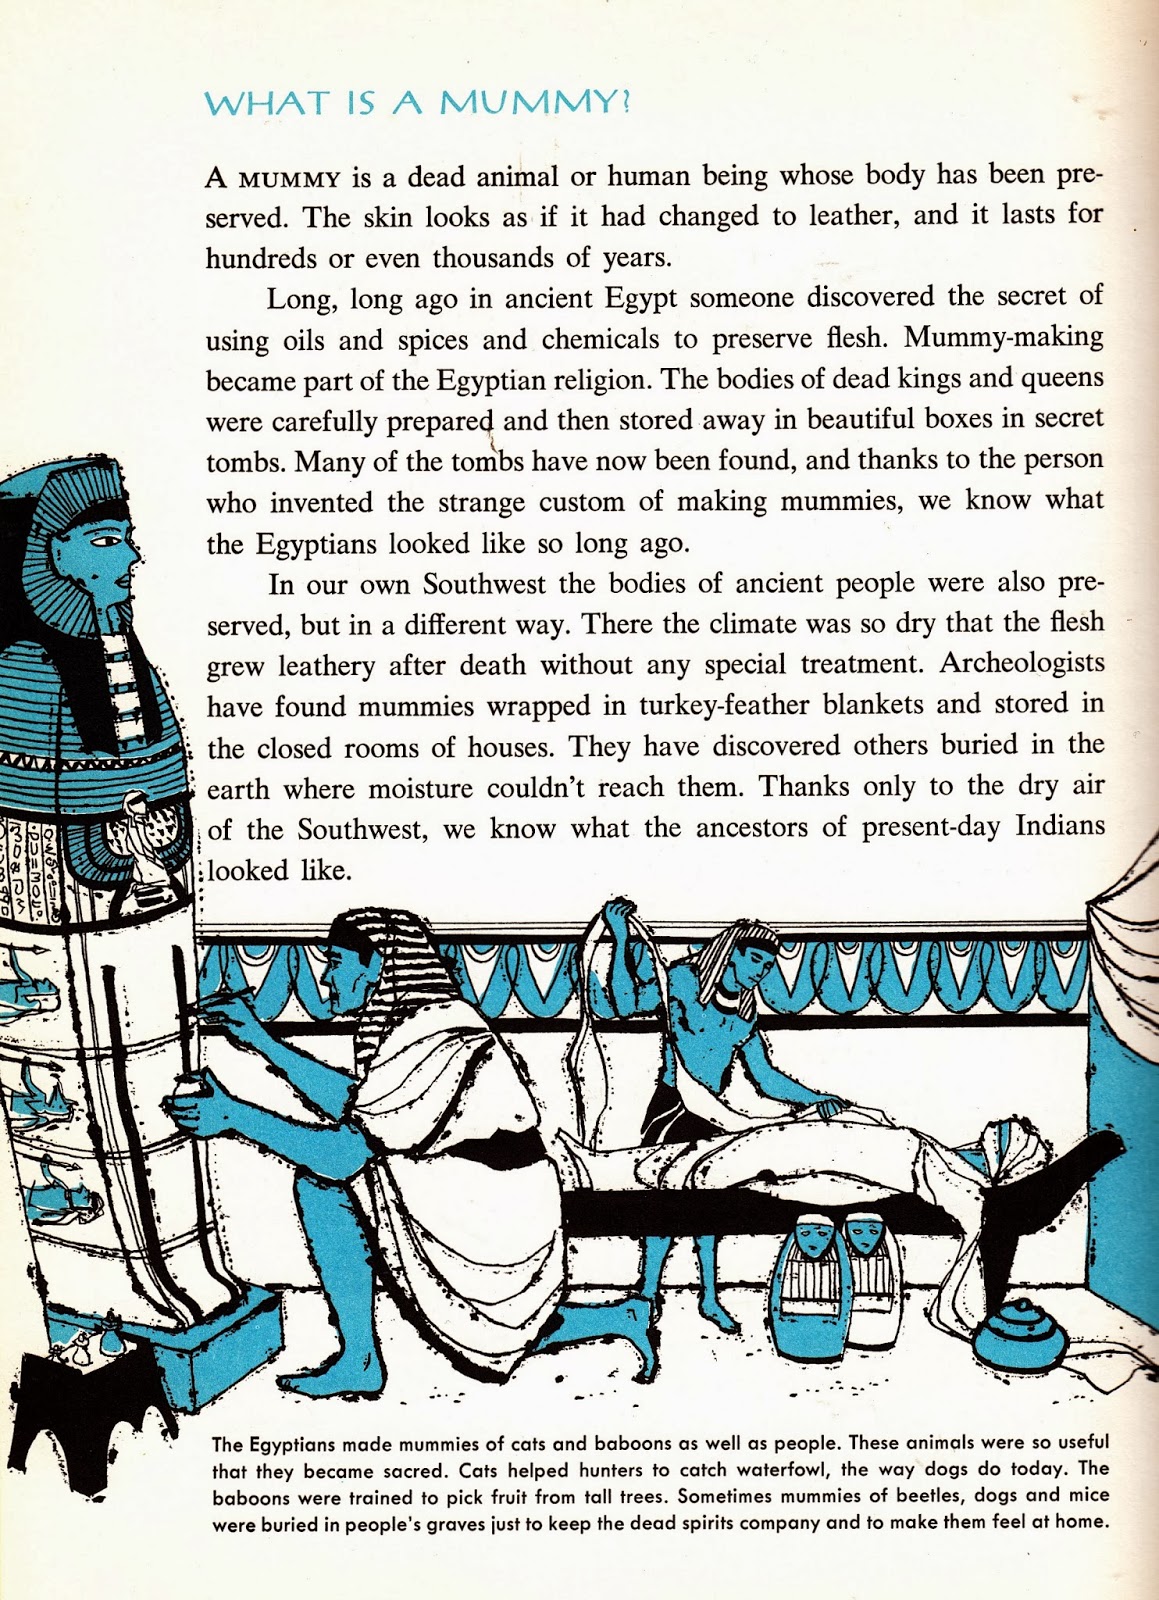 mixed-up-monster-club-mommy-what-s-a-mummy-from-the-answer-book-by-mary-elting-1963